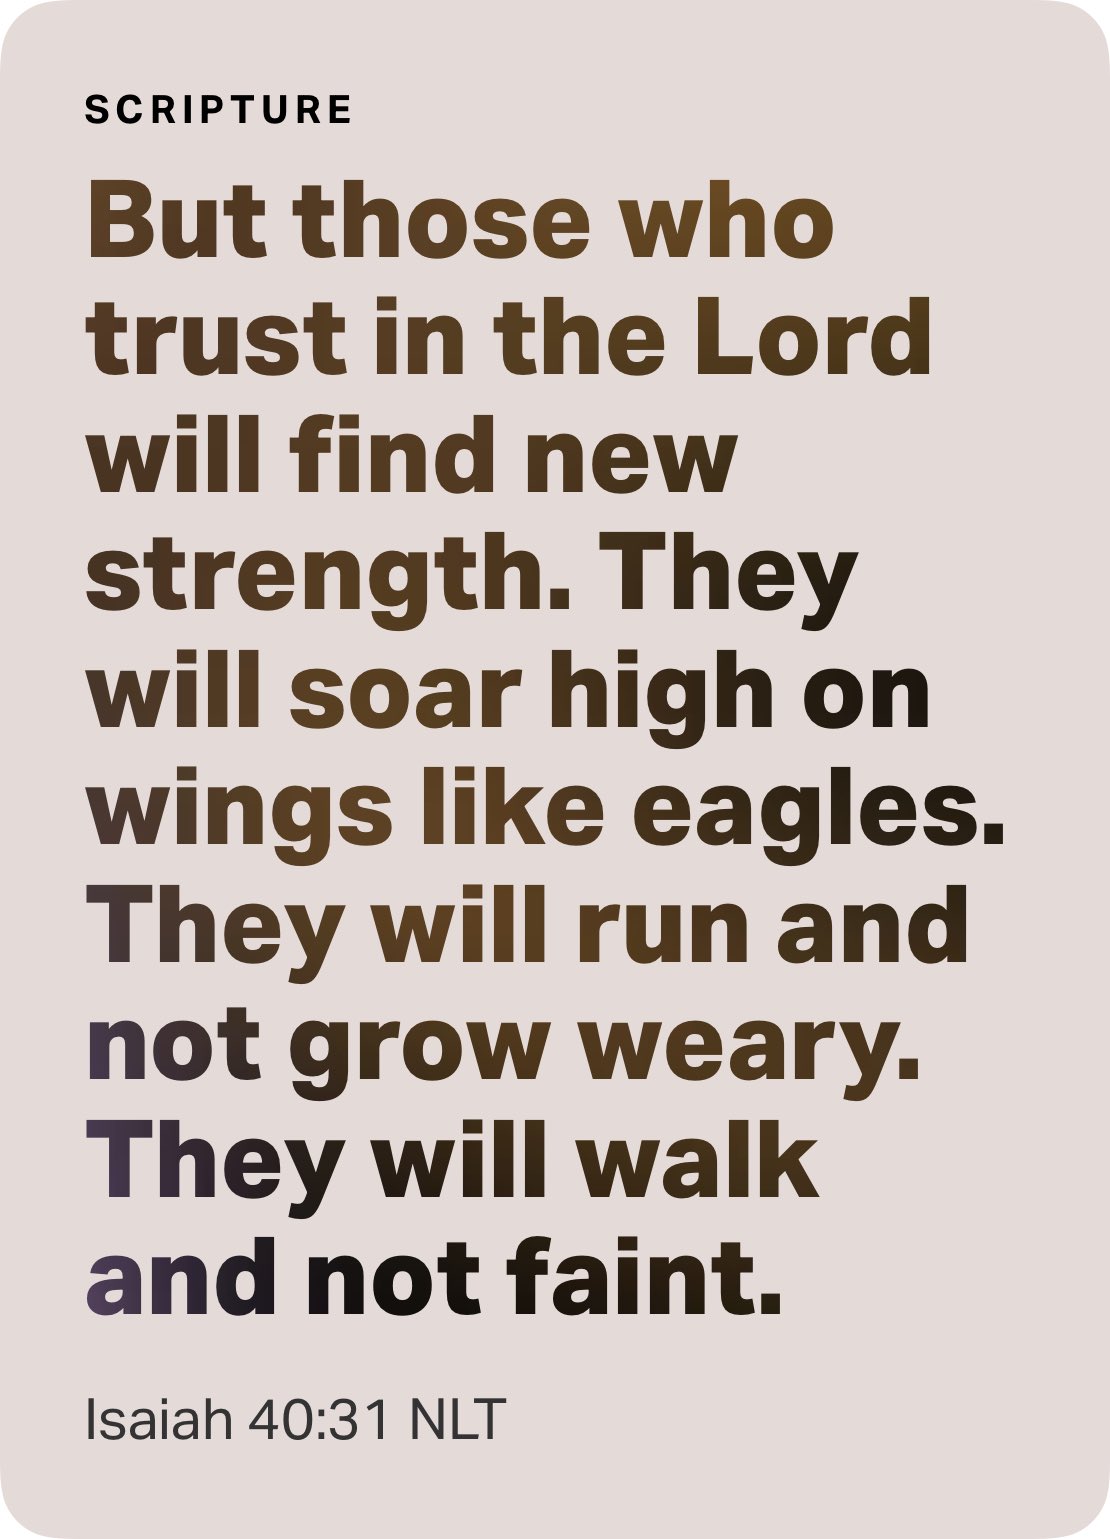 SCRIPTURE But those who trust in the Lord will find new strength: They will soar high on wings like eagles: They will run and not grow weary: will walk and not faint: Isaiah 40.31 NLT They